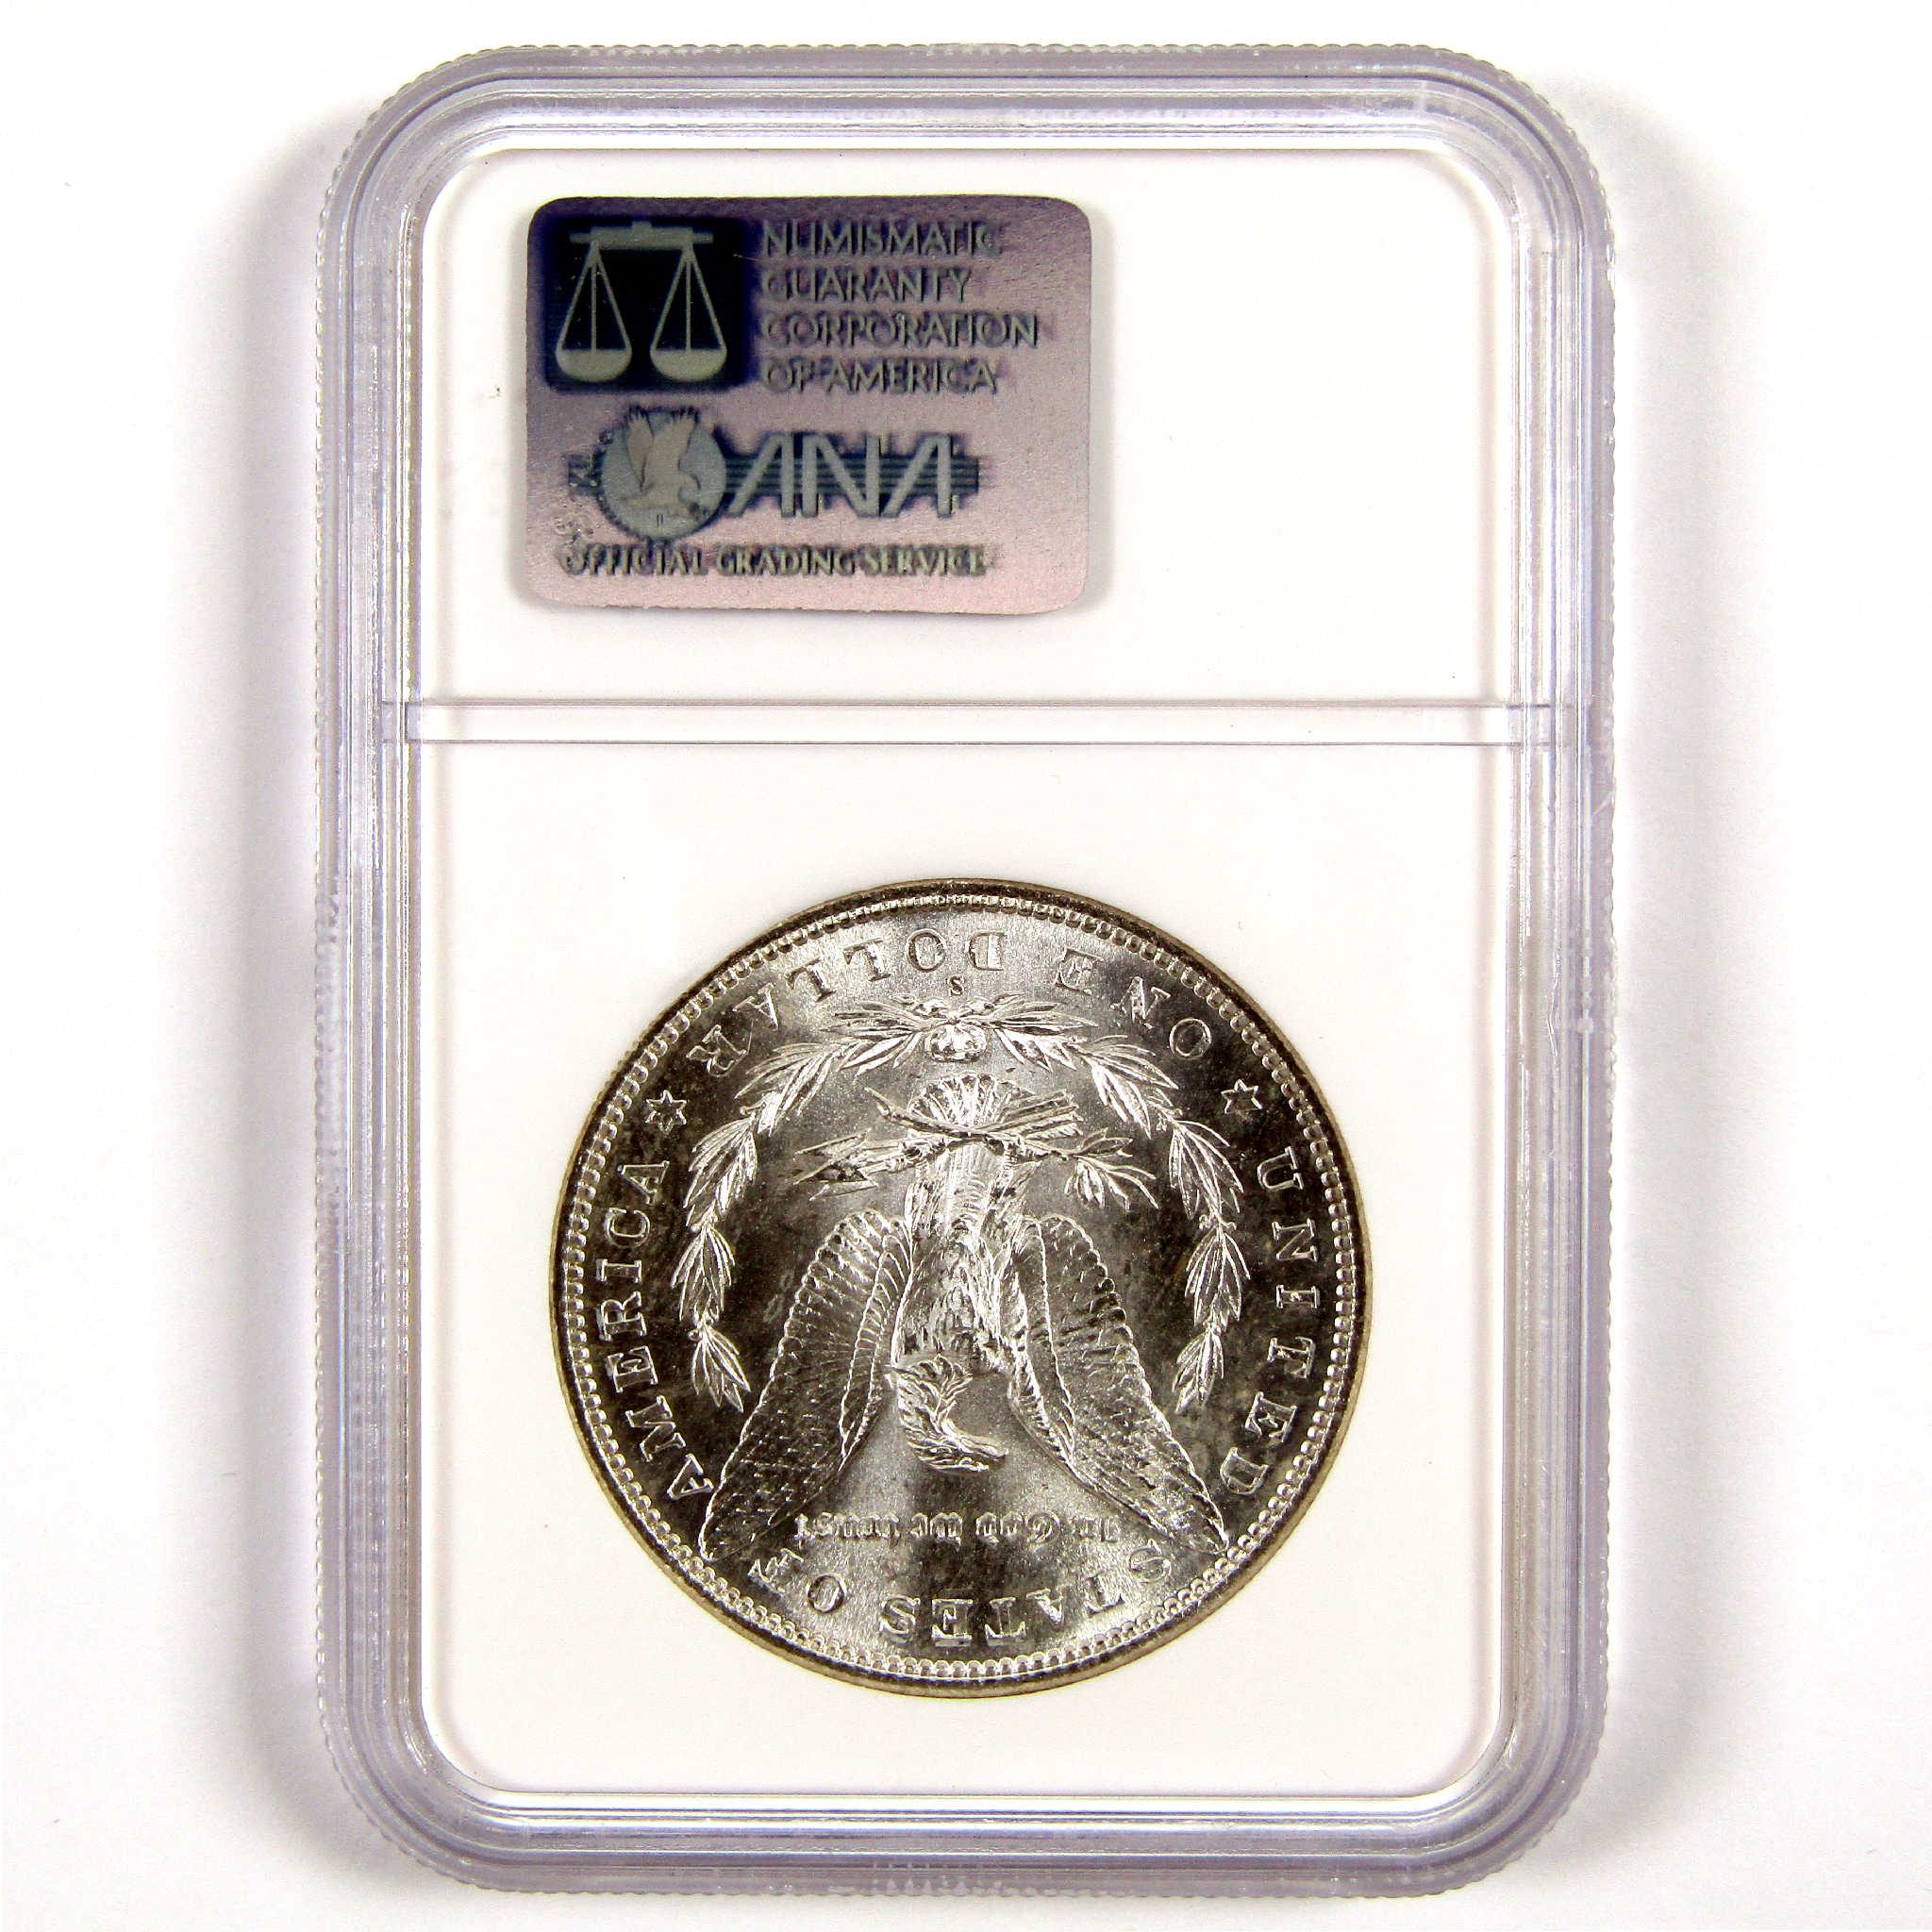 1882 S Morgan Dollar MS 66 NGC Silver $1 Uncirculated Coin SKU:CPC6239 - Morgan coin - Morgan silver dollar - Morgan silver dollar for sale - Profile Coins &amp; Collectibles